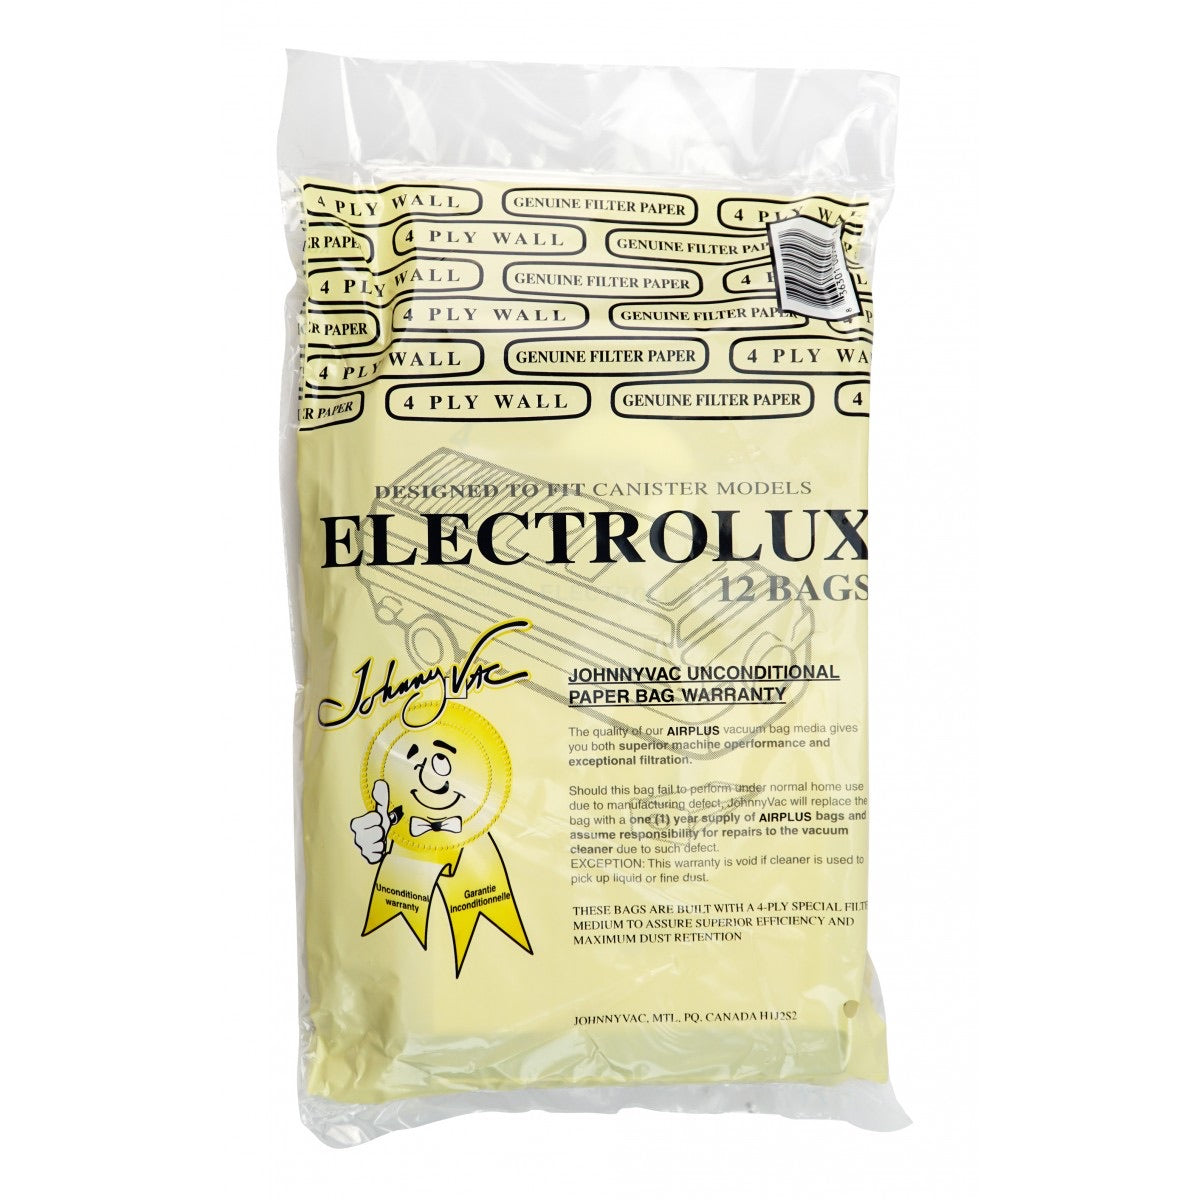 Electrolux paper bag - style C 